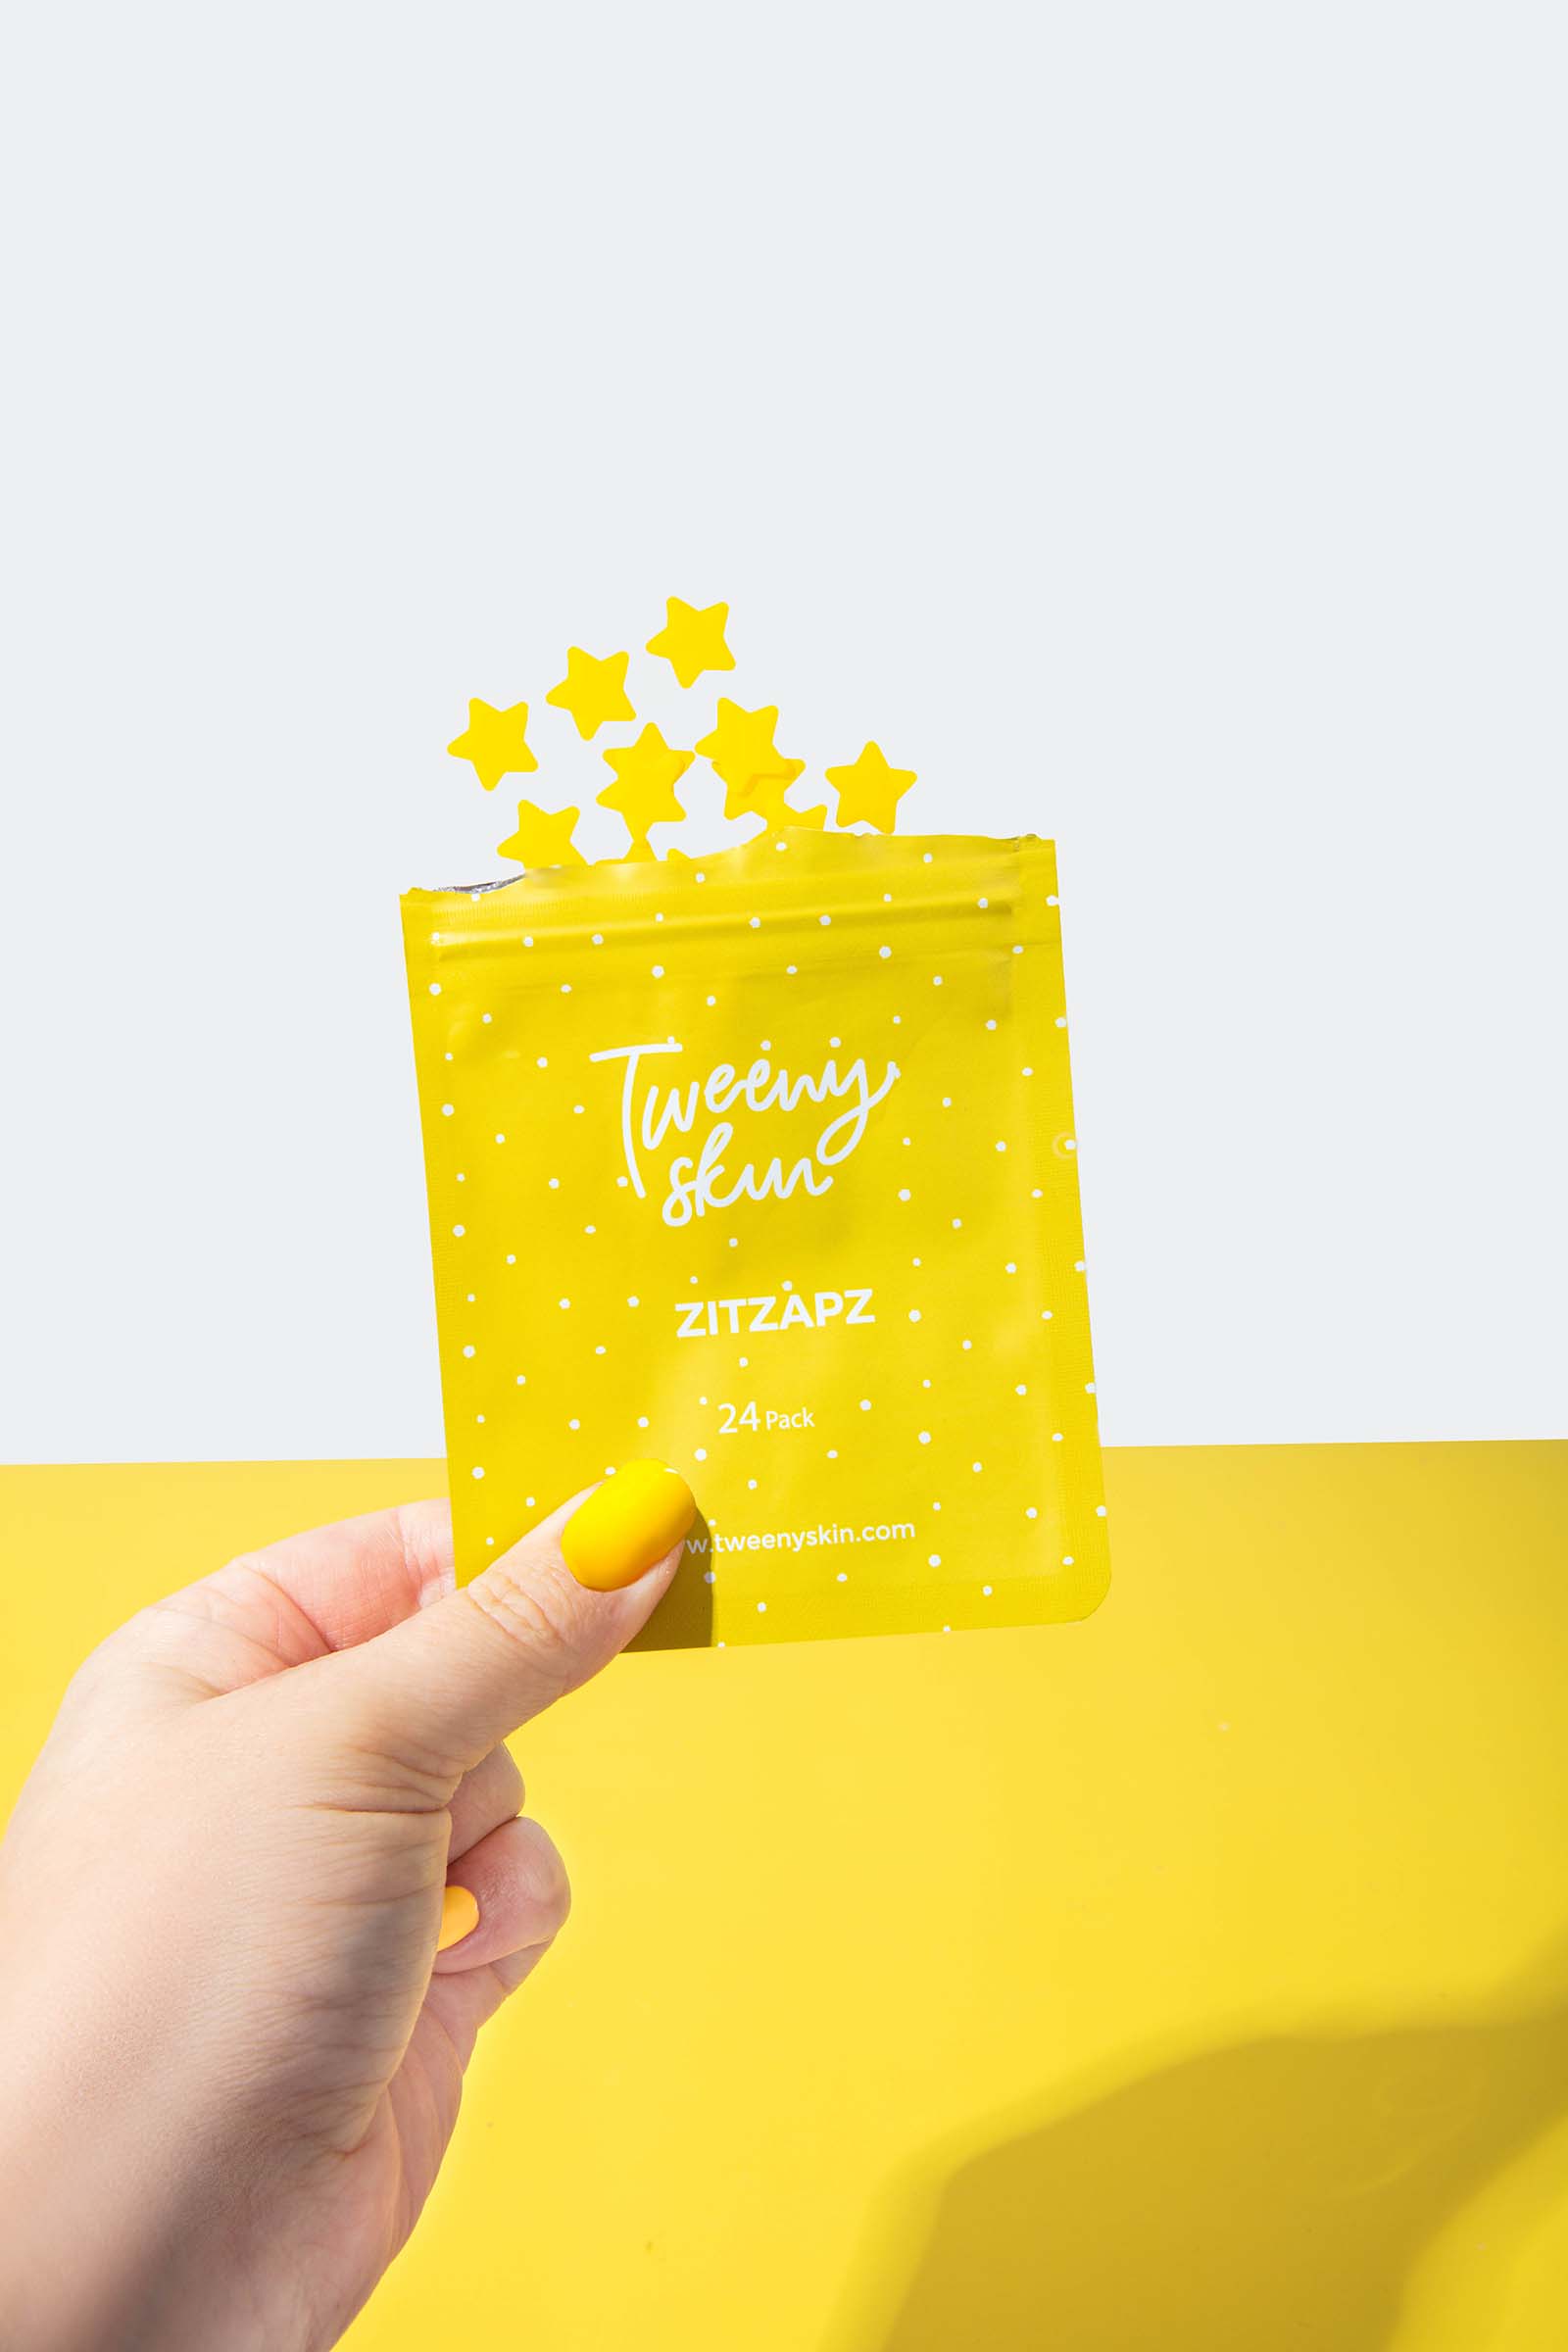 Yellow and Bright Product Photos for a Skincare Brand